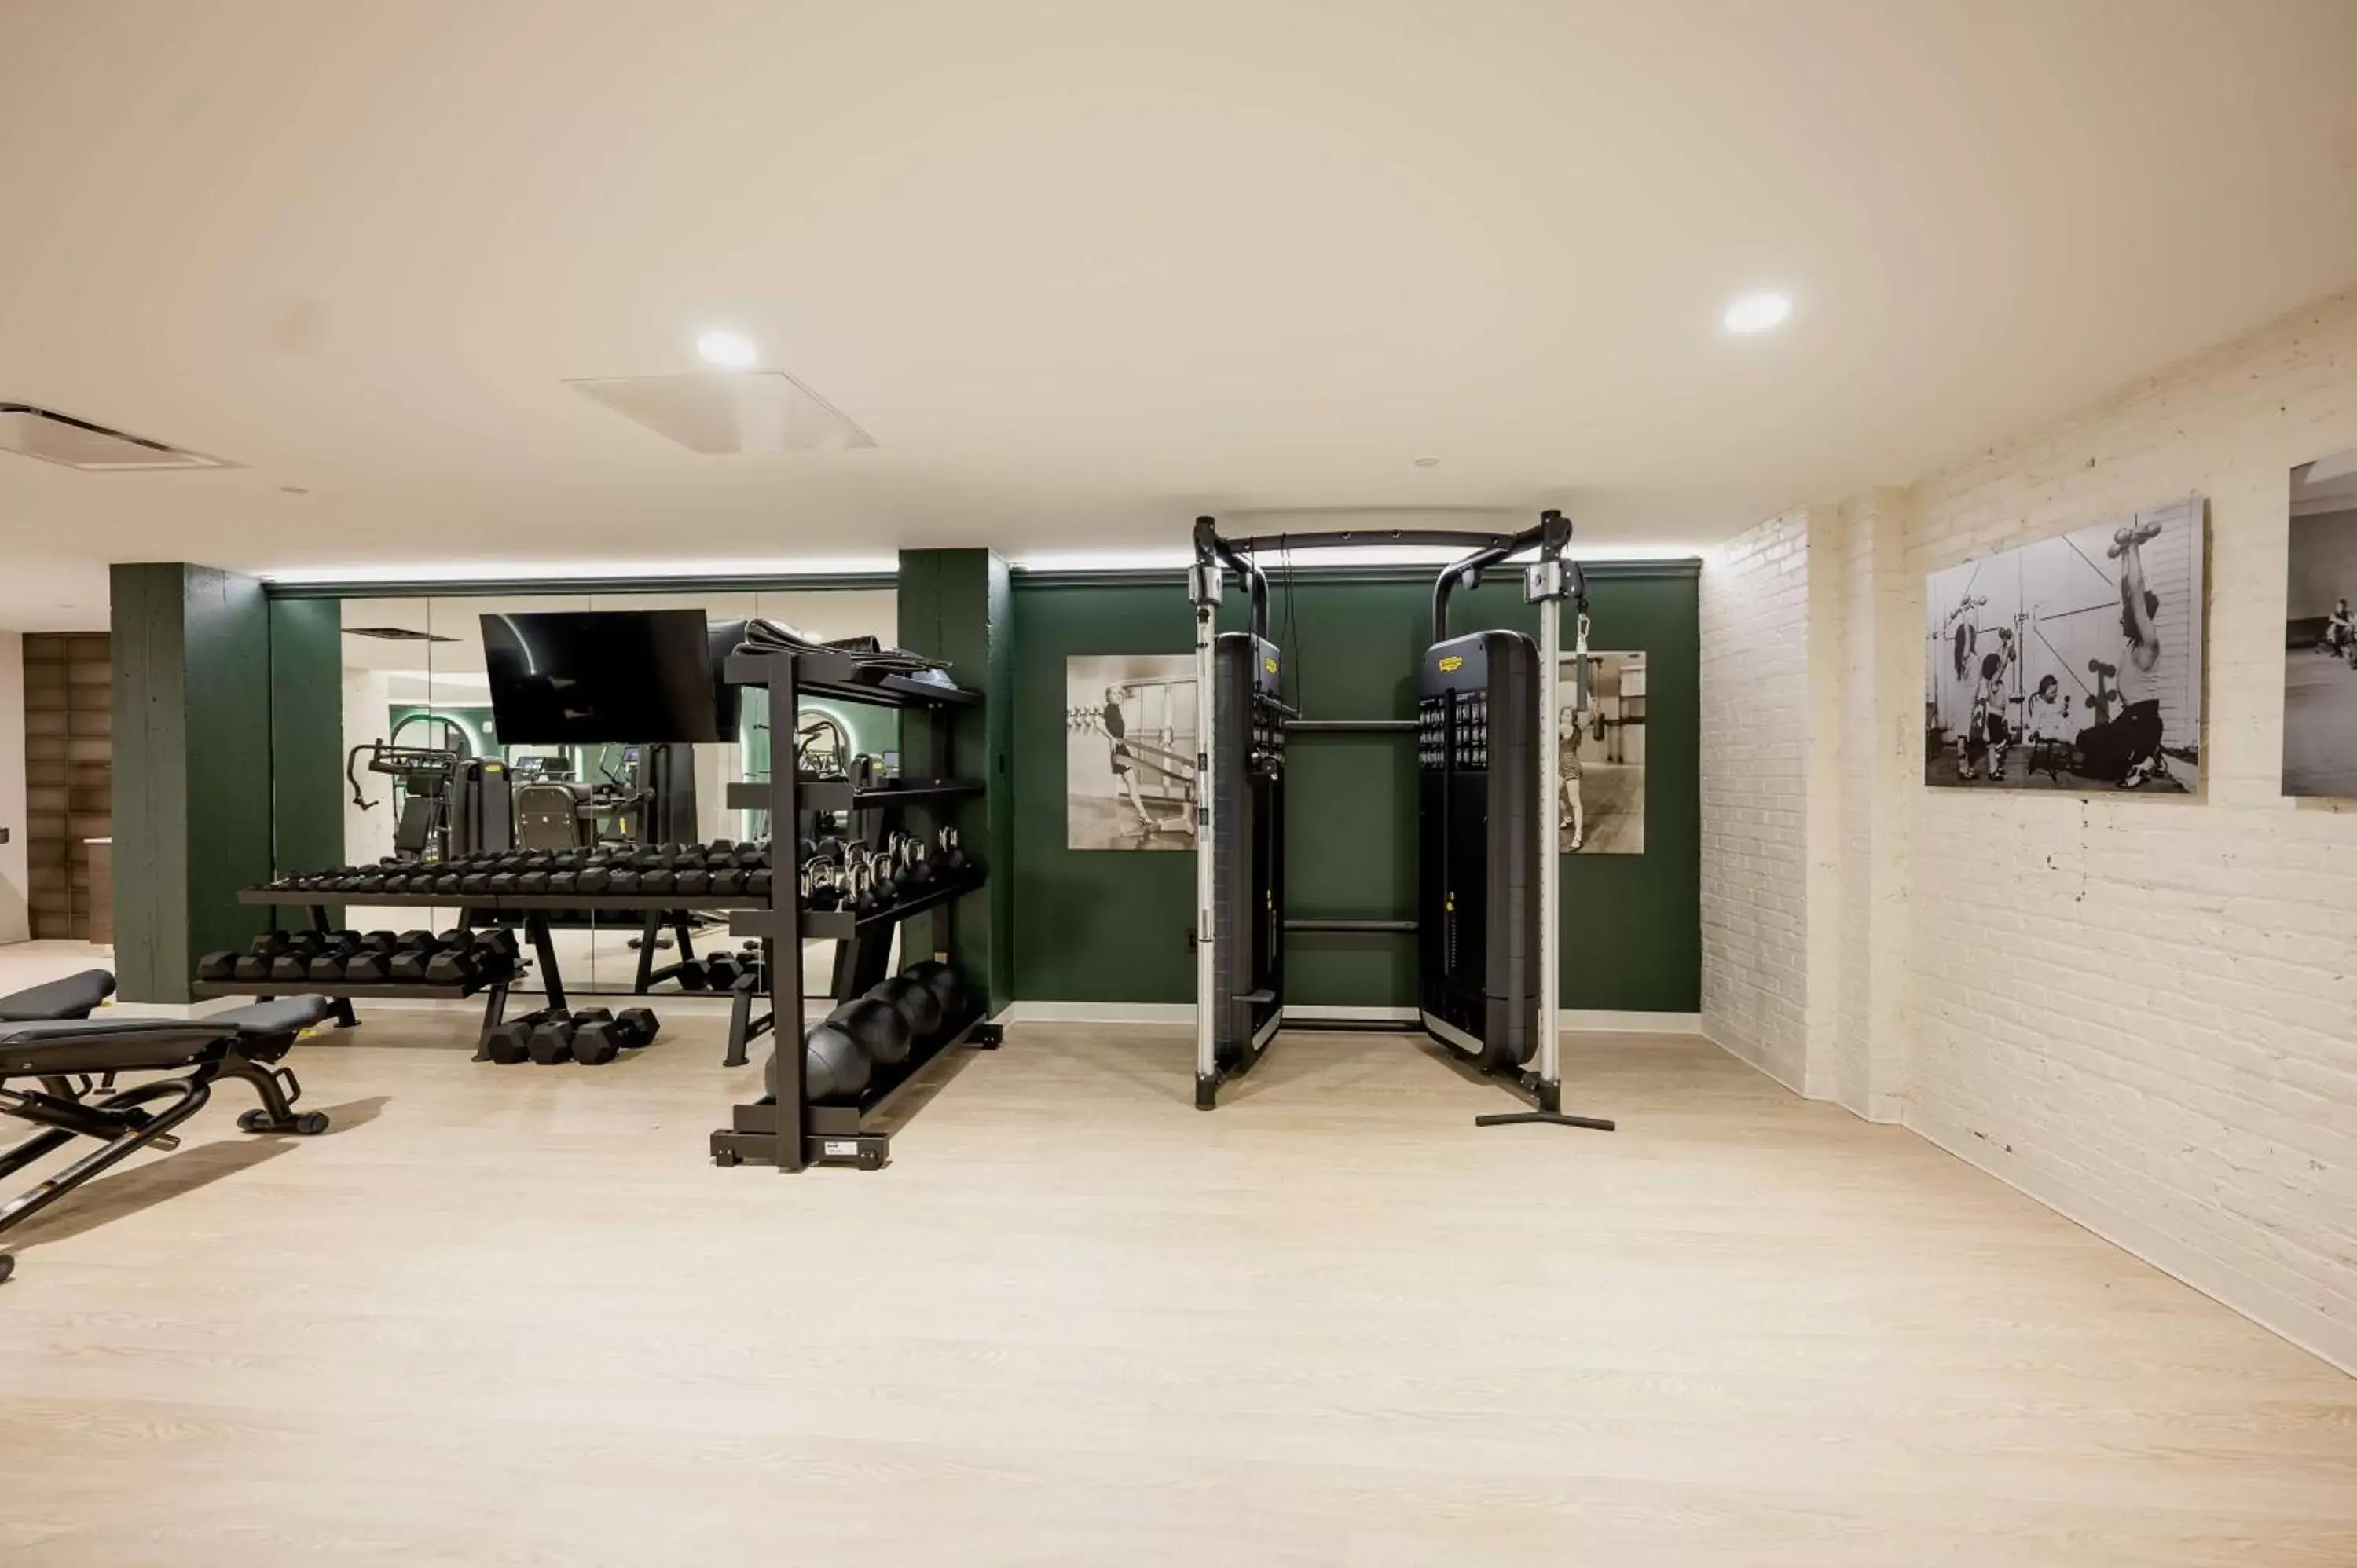 Fitness centre/facilities, Fitness Center/Facilities in Hotel Fort Des Moines, Curio Collection By Hilton